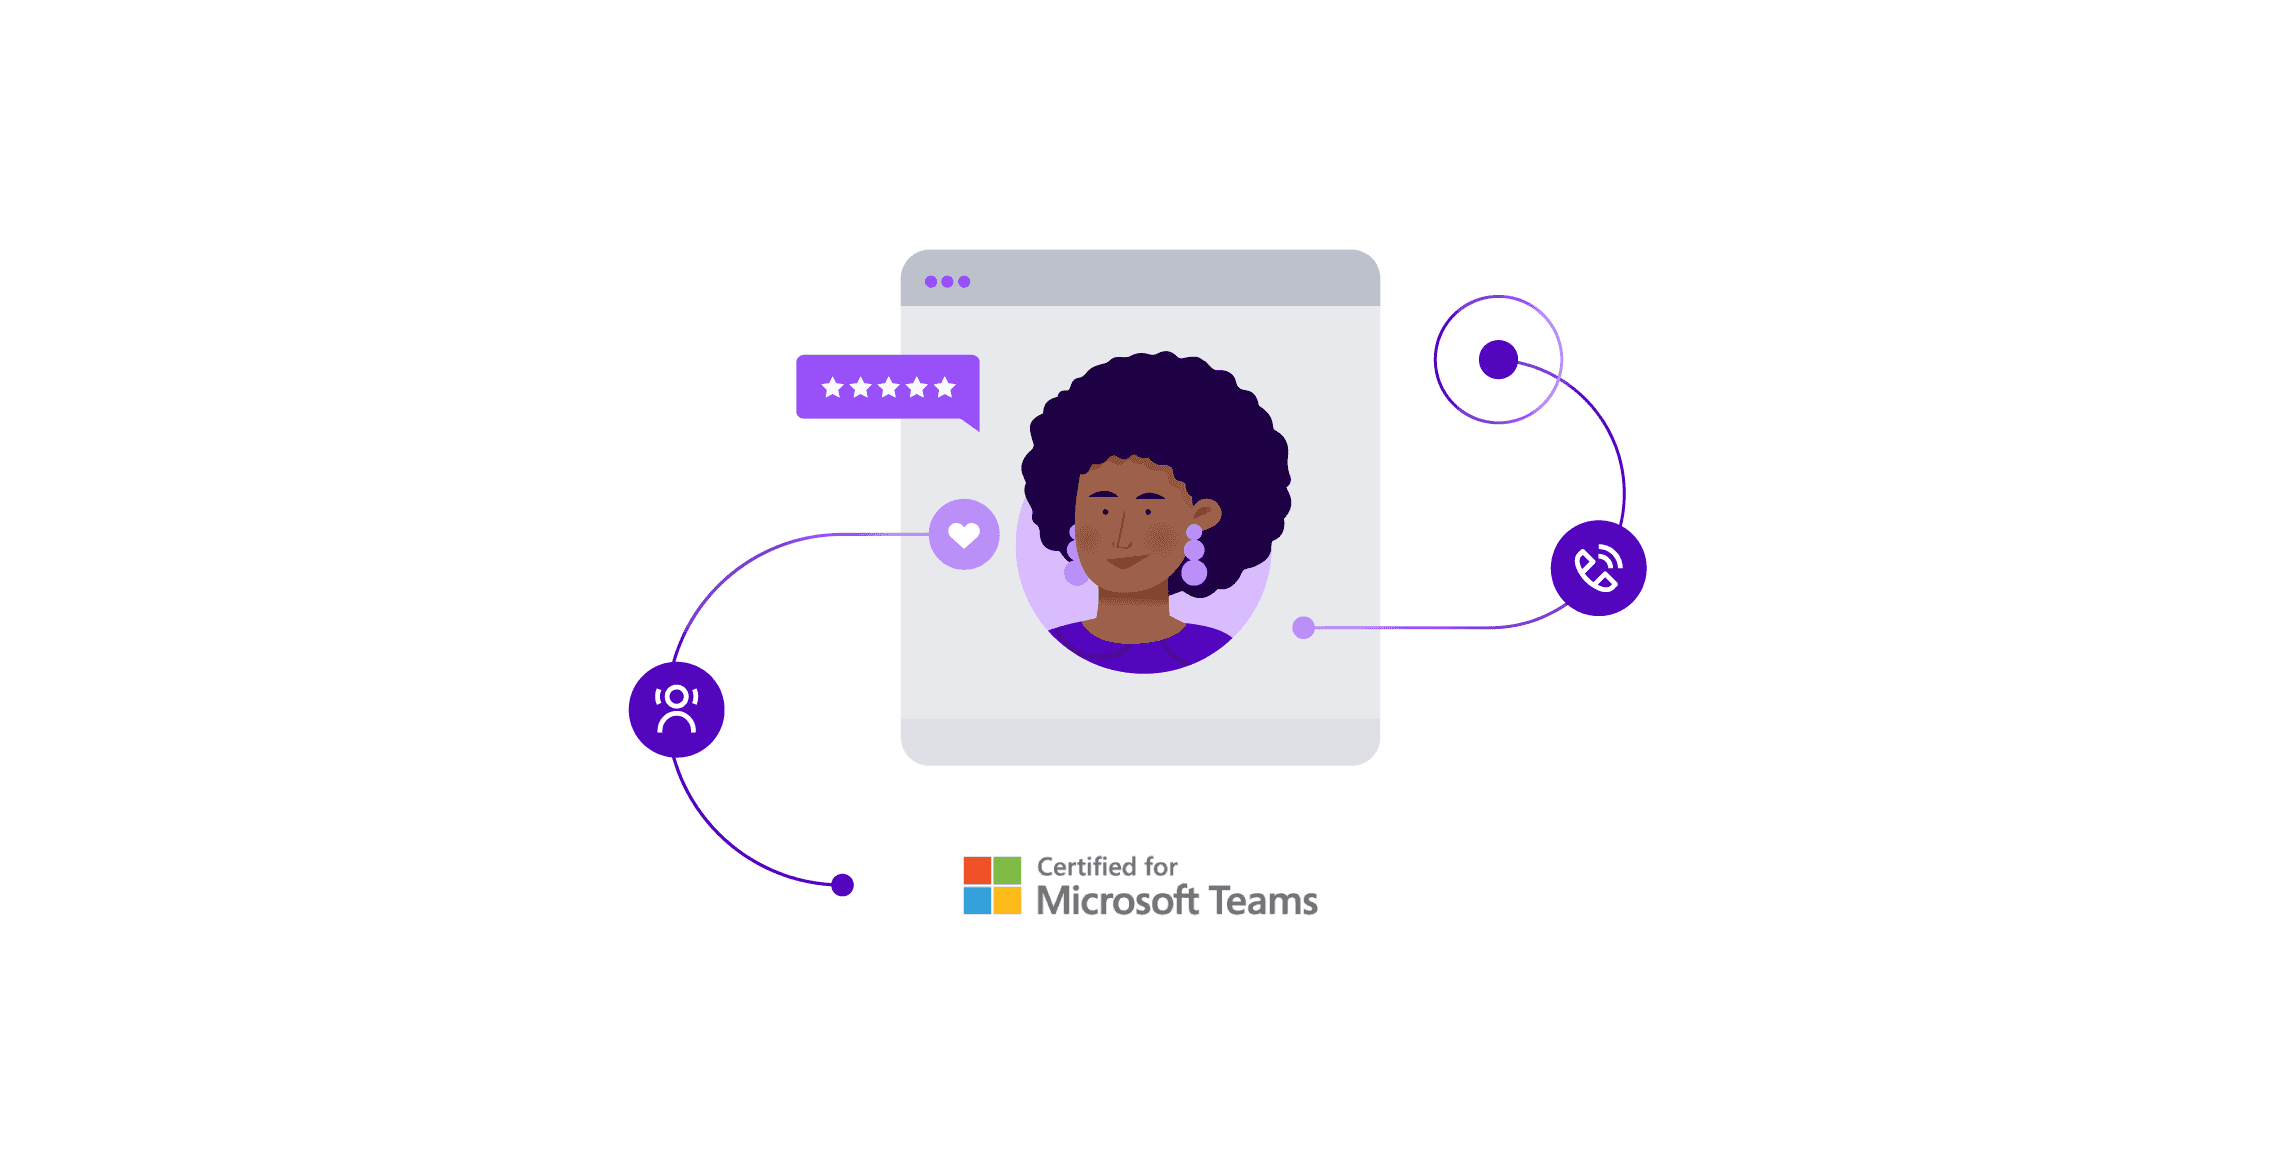 Contact center agent collaborating with a Talkdesk certified Microsoft Teams Connected Contact Center